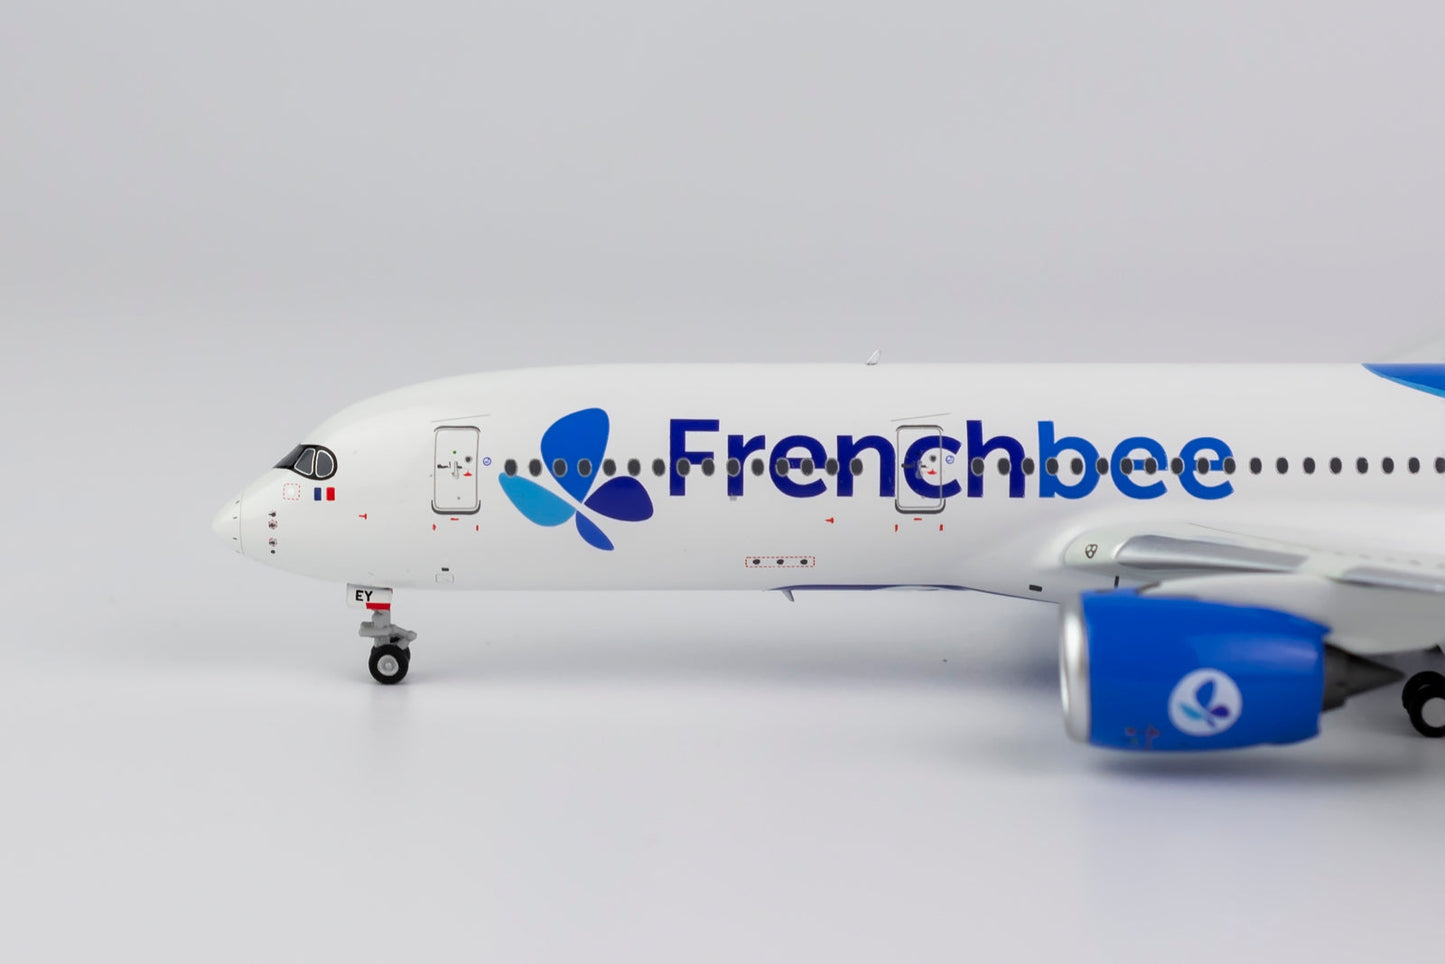 1/400 Frenchbee A350-900 NG Models 39028